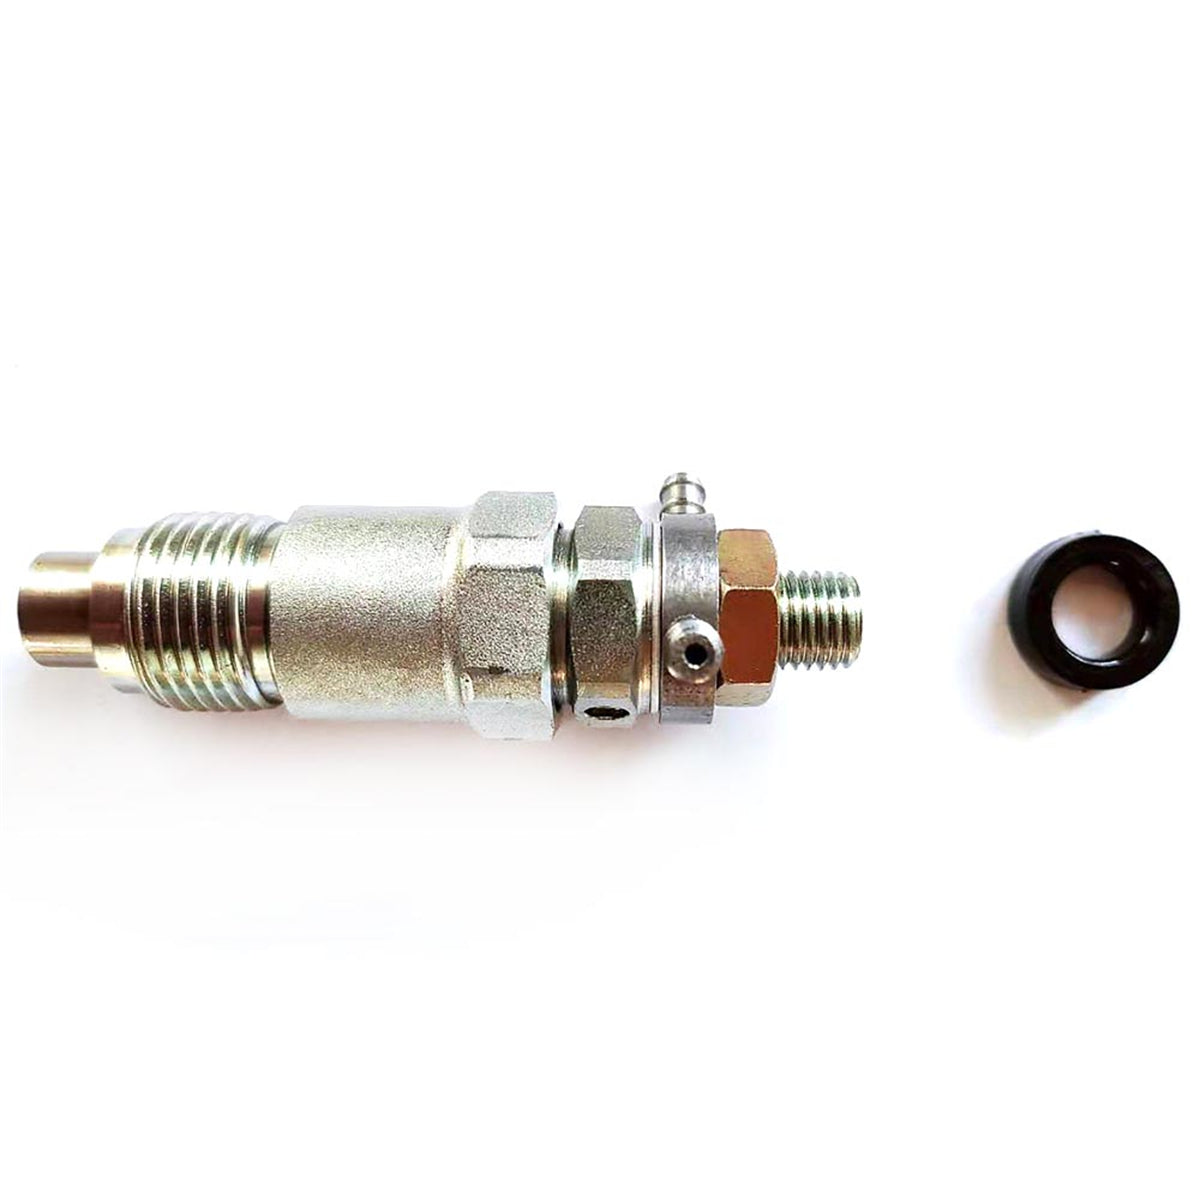 Fuel Injector 15271-53000, Fuel Injector For Kubota, Daysyore Fuel Injector, Auto Fuel Injector, Car Fuel Injector